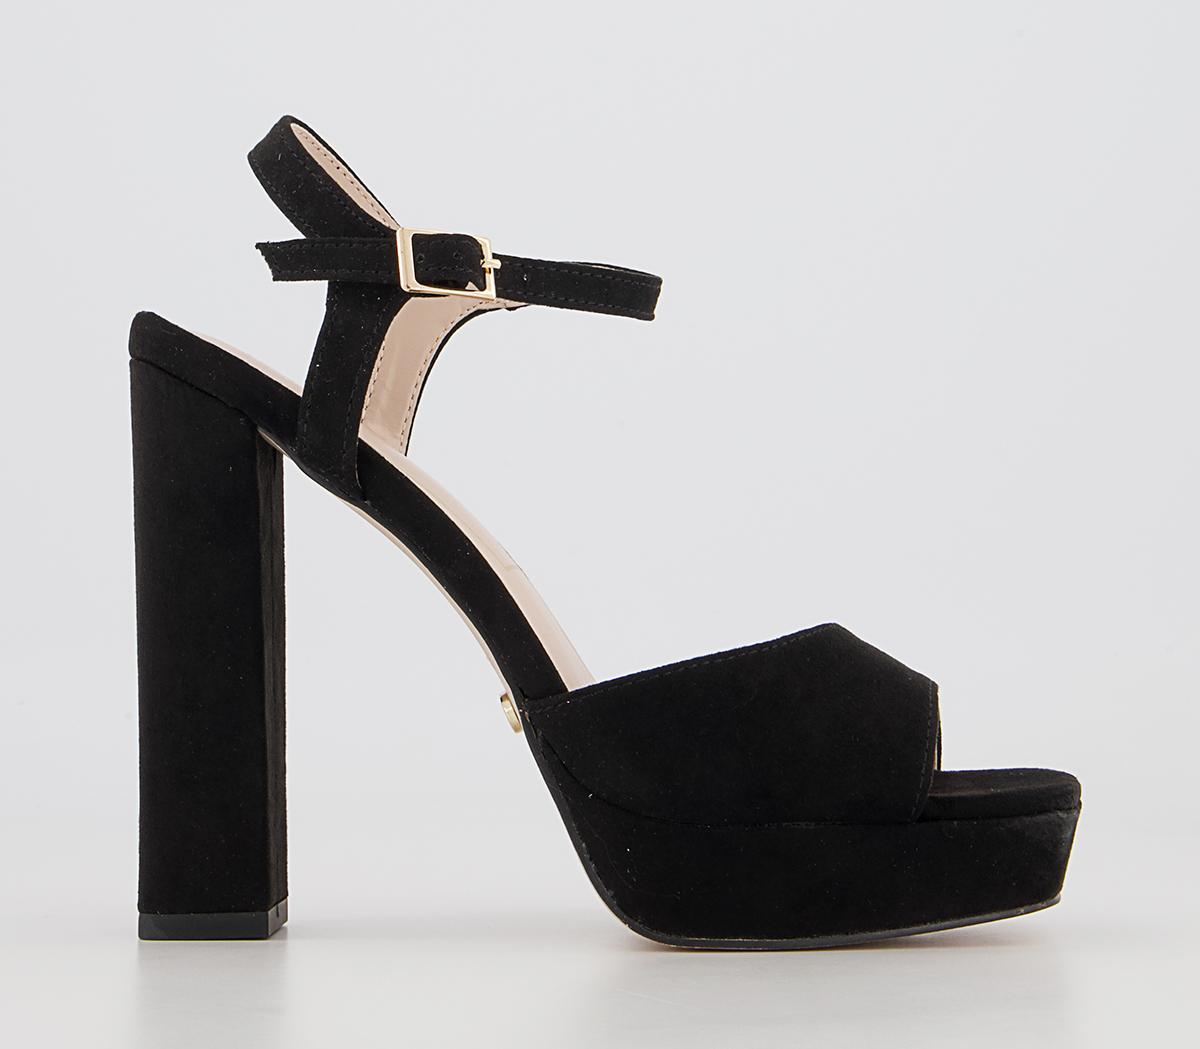 Women's Black High Heel Sandals, Peep Toe, Sexy, Fashionable, Shows Height  And White Complexion, Chunky Heel, Daily Or Office Wear, Versatile,  Minimalist, Comfortable, Accentuates Height And Slender Leg | SHEIN